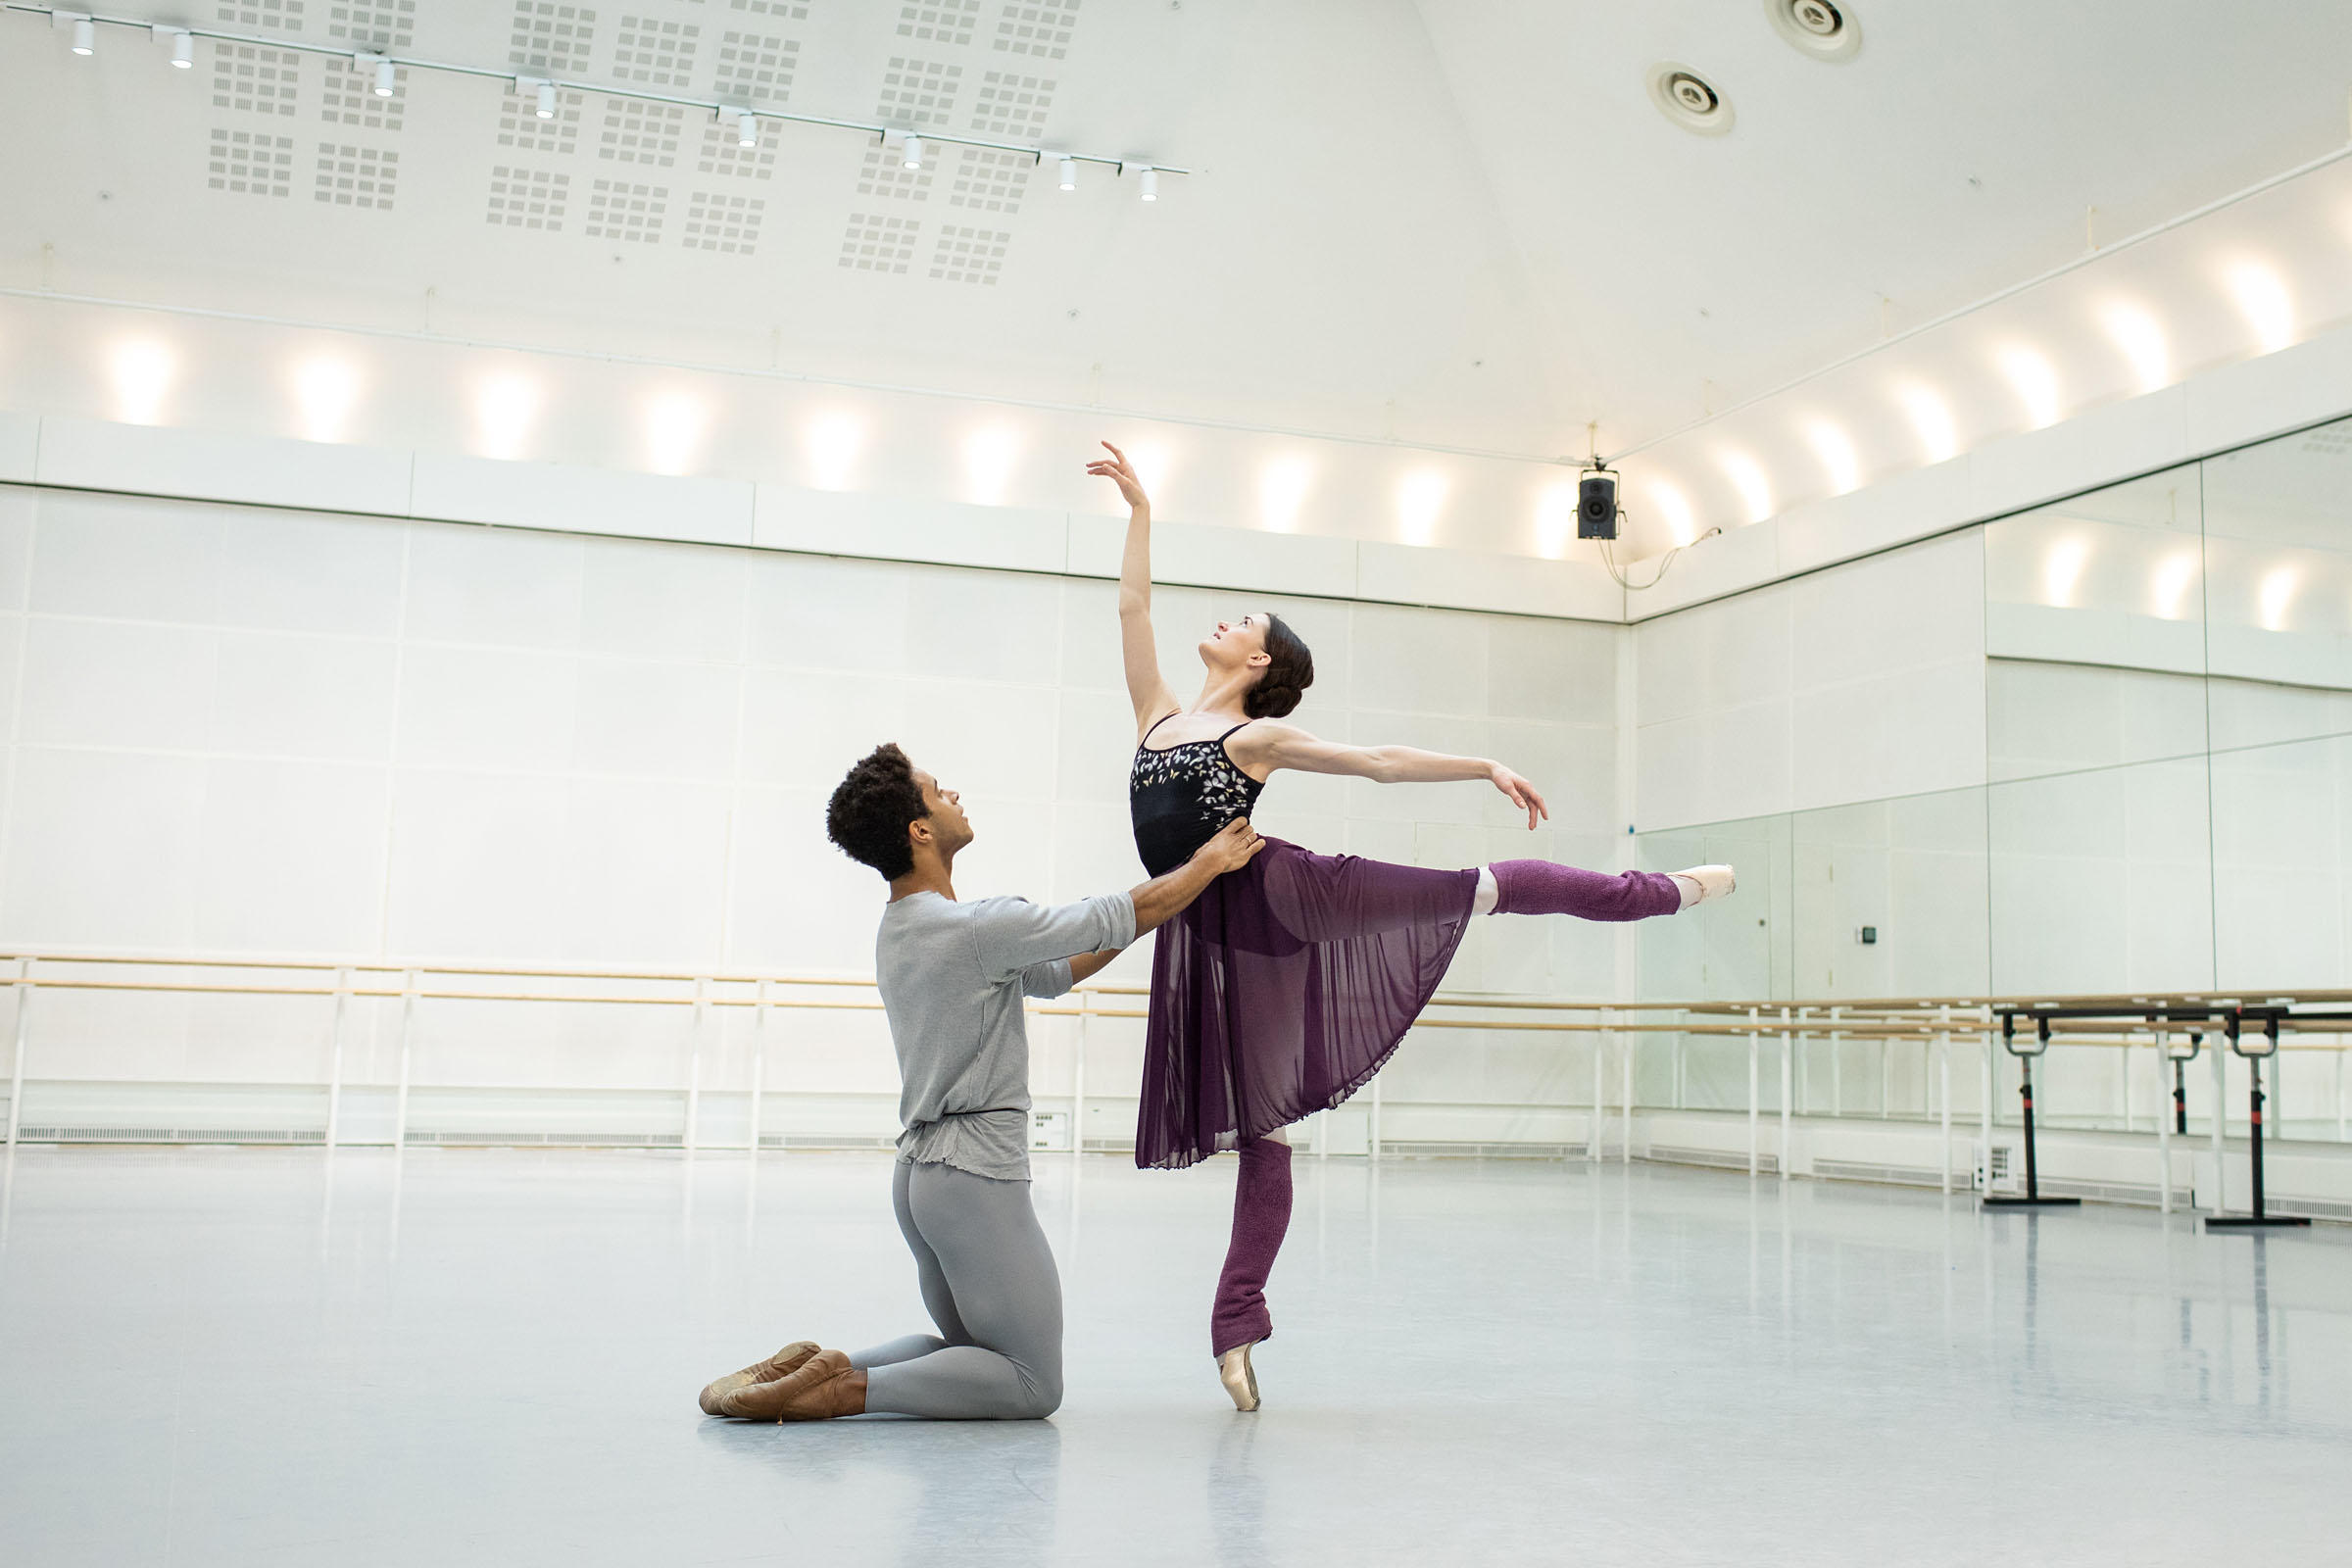 Marcelino Sambé and Anna Rose O'Sullivan rehearsing their roles in Romeo and Juliet at the Royal Opera House